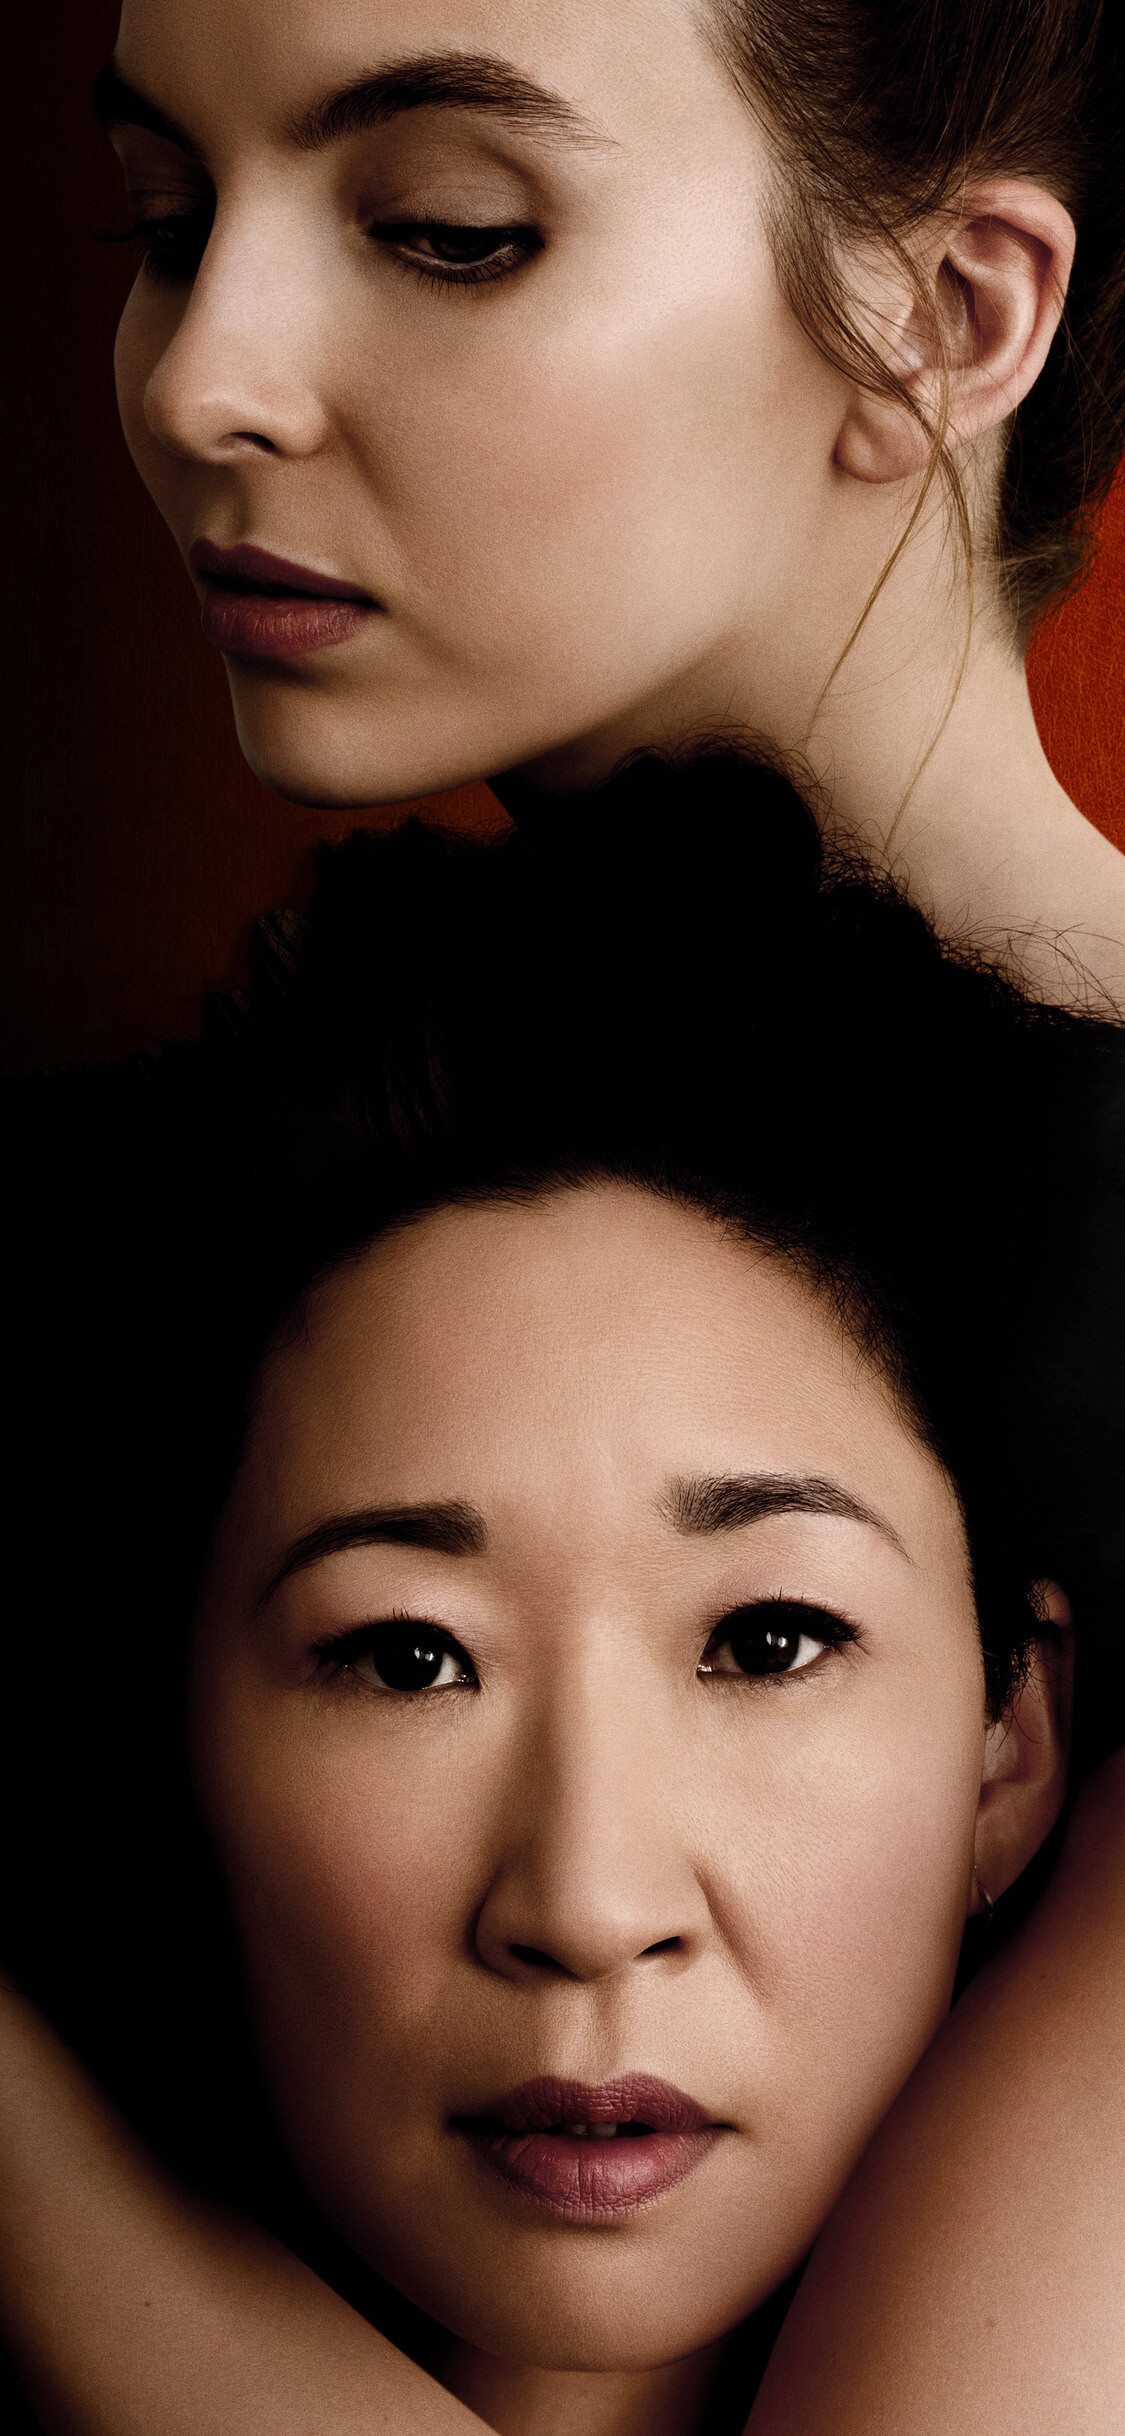 Killing Eve: Villanelle and Eve Polastri, develop a mutual sexually and romantically charged obsession for one another. 1130x2440 HD Wallpaper.